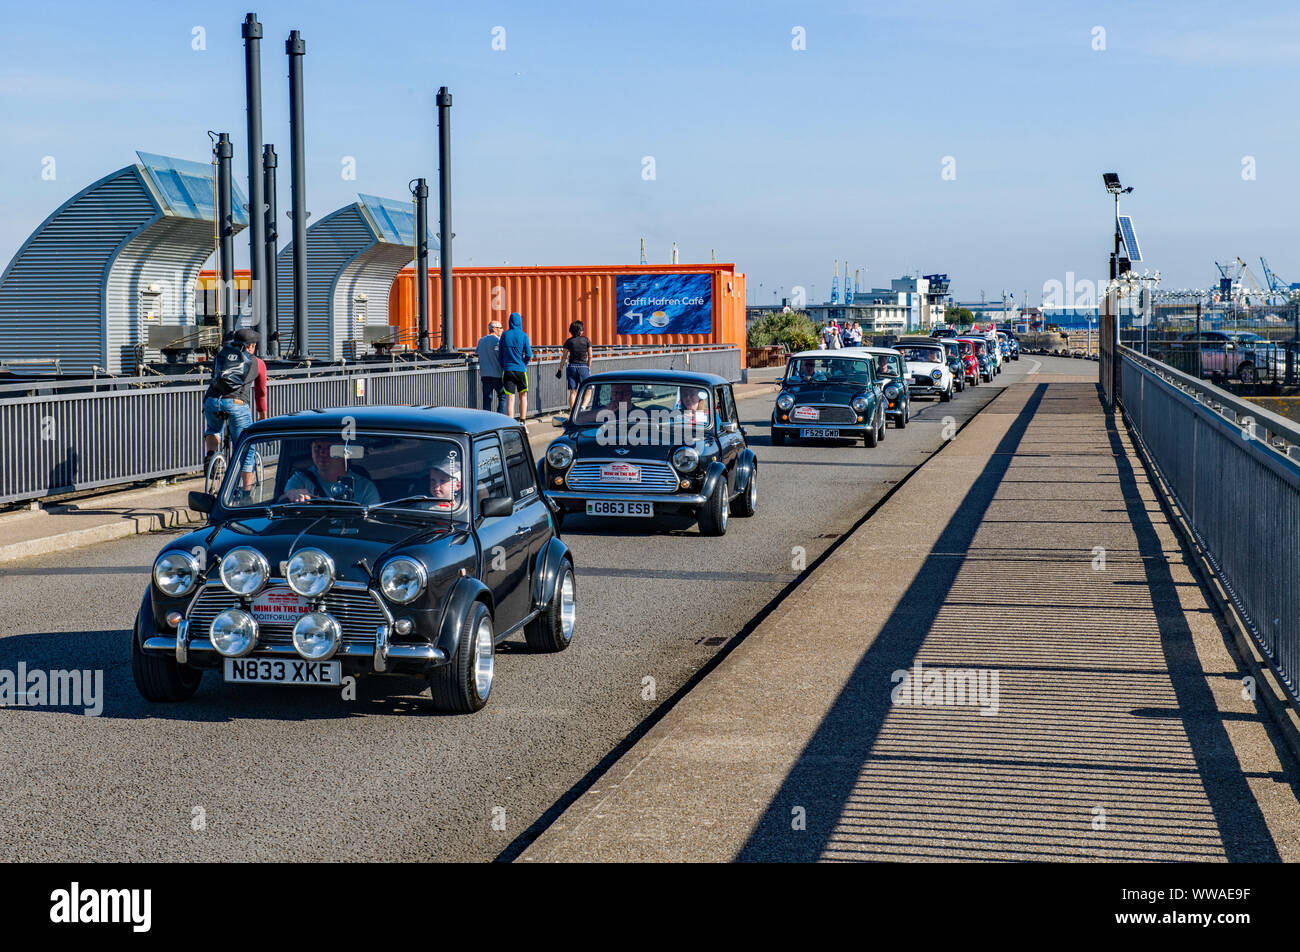 Cardiff Mini Club with their procession of 100 mini cars crossing the Cardiff Bay Barrage on a sunny summer day. This was a charity raiser. Stock Photo